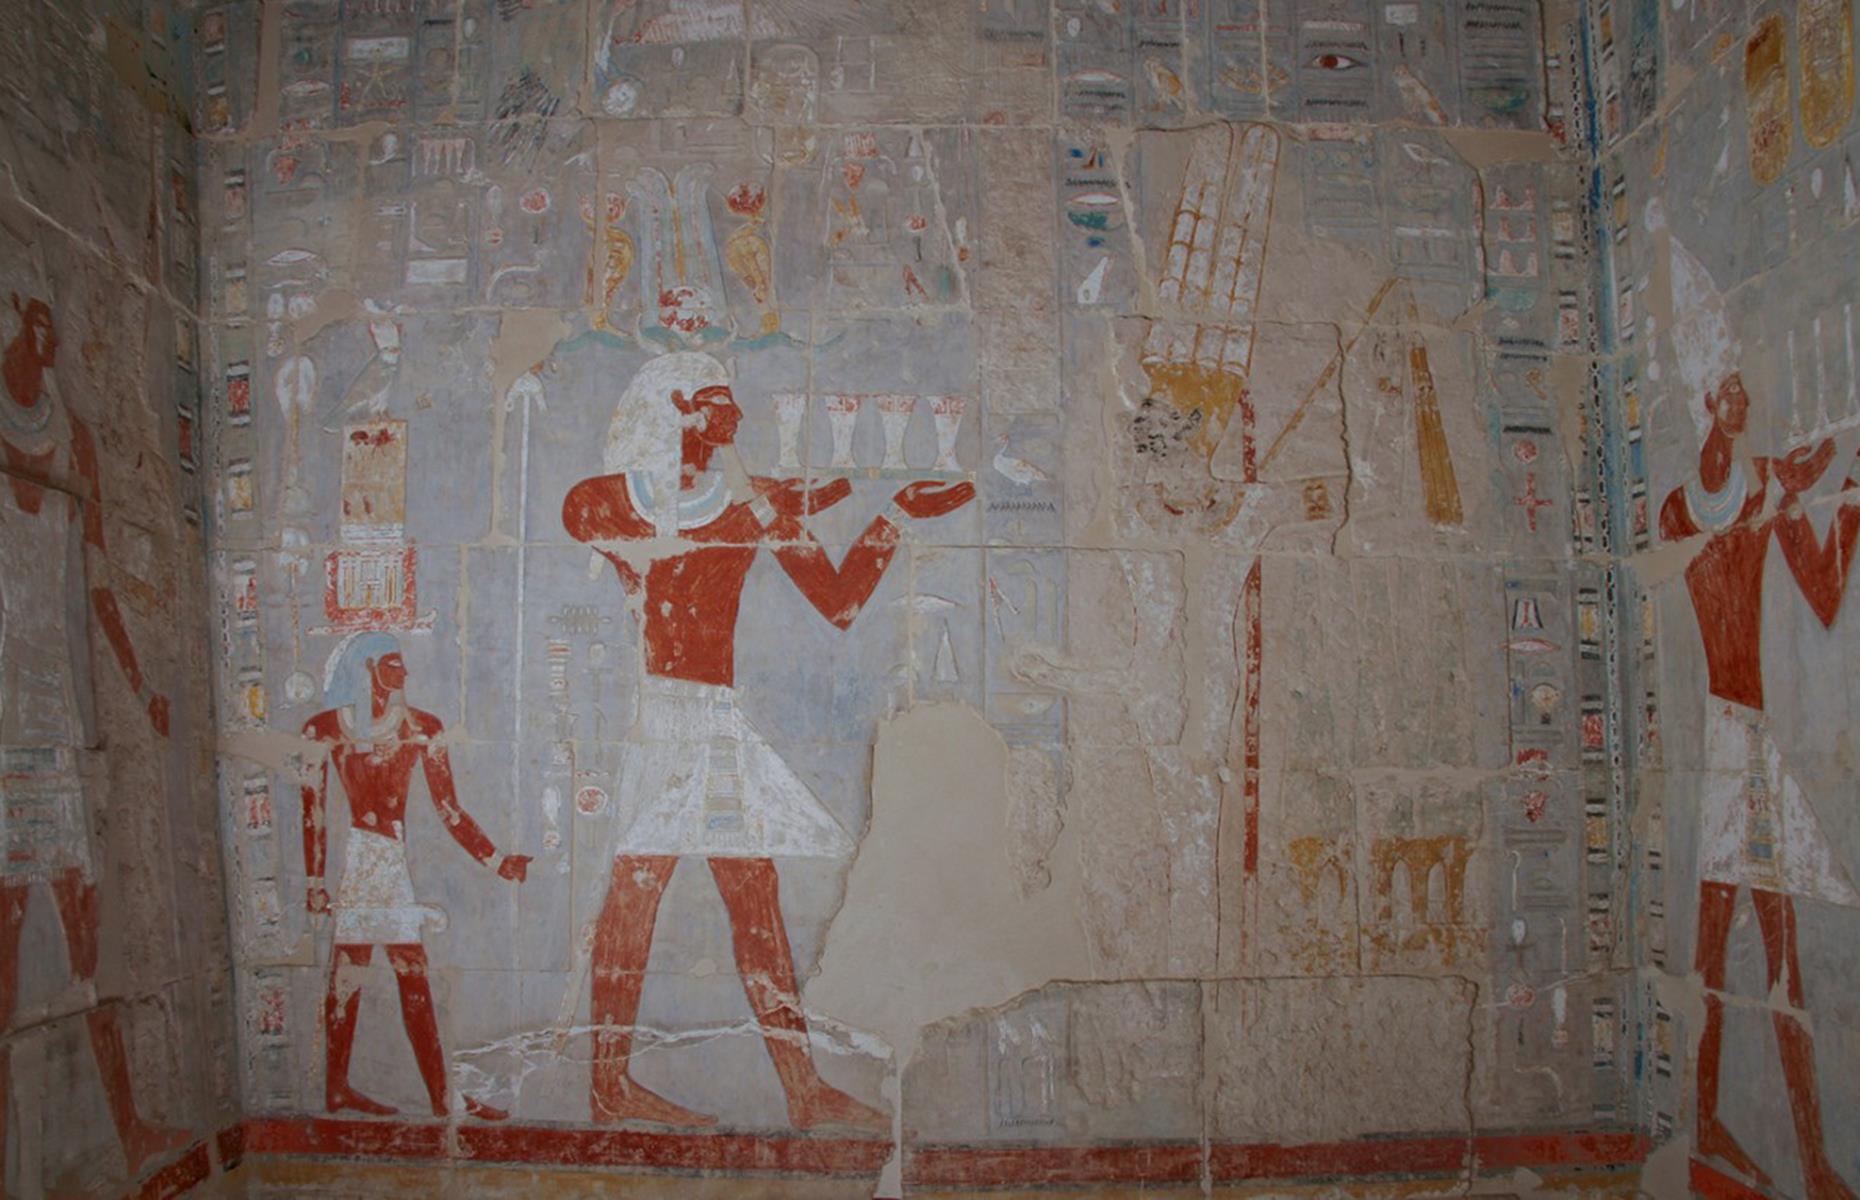 <p>In February 2023, Egypt opened one of its most ancient monuments to the public for the first time. The 4,000-year-old Tomb of Meru, situated on the Nile's western bank in Luxor, was built for a high-ranking official in the court of King Mentuhotep II (who died in 2004 BC). The tomb, located on the North Asasif necropolis, is close to the mortuary temple of Mentuhotep II. Inside the rock-hewn tomb is a collection of elaborate murals and a stone sarcophagus, which Egyptology enthusiasts are now able to enjoy.</p>